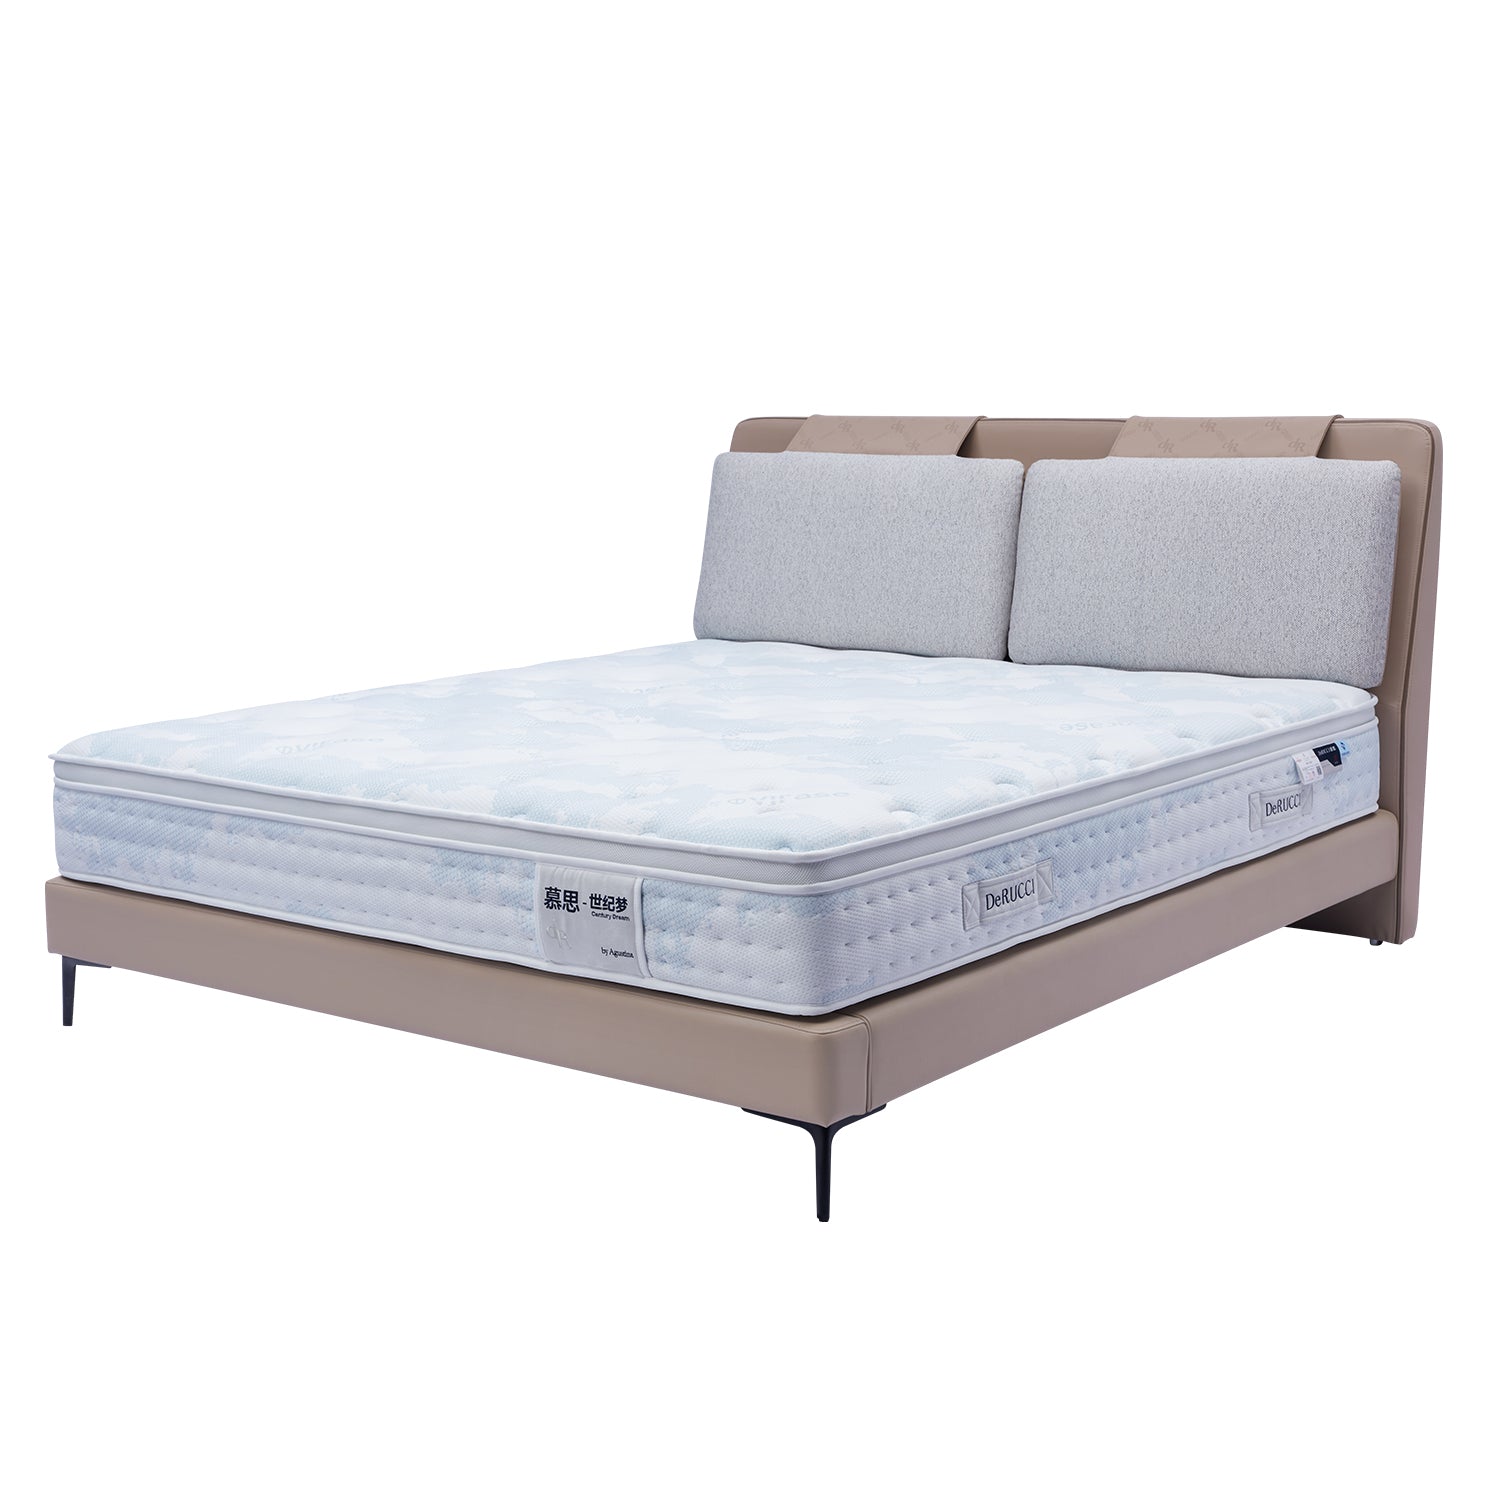 DeRUCCI bed frame BOC1-006 with beige leather base and cushioned headboard, featuring a white quilted mattress and sleek dark-colored legs